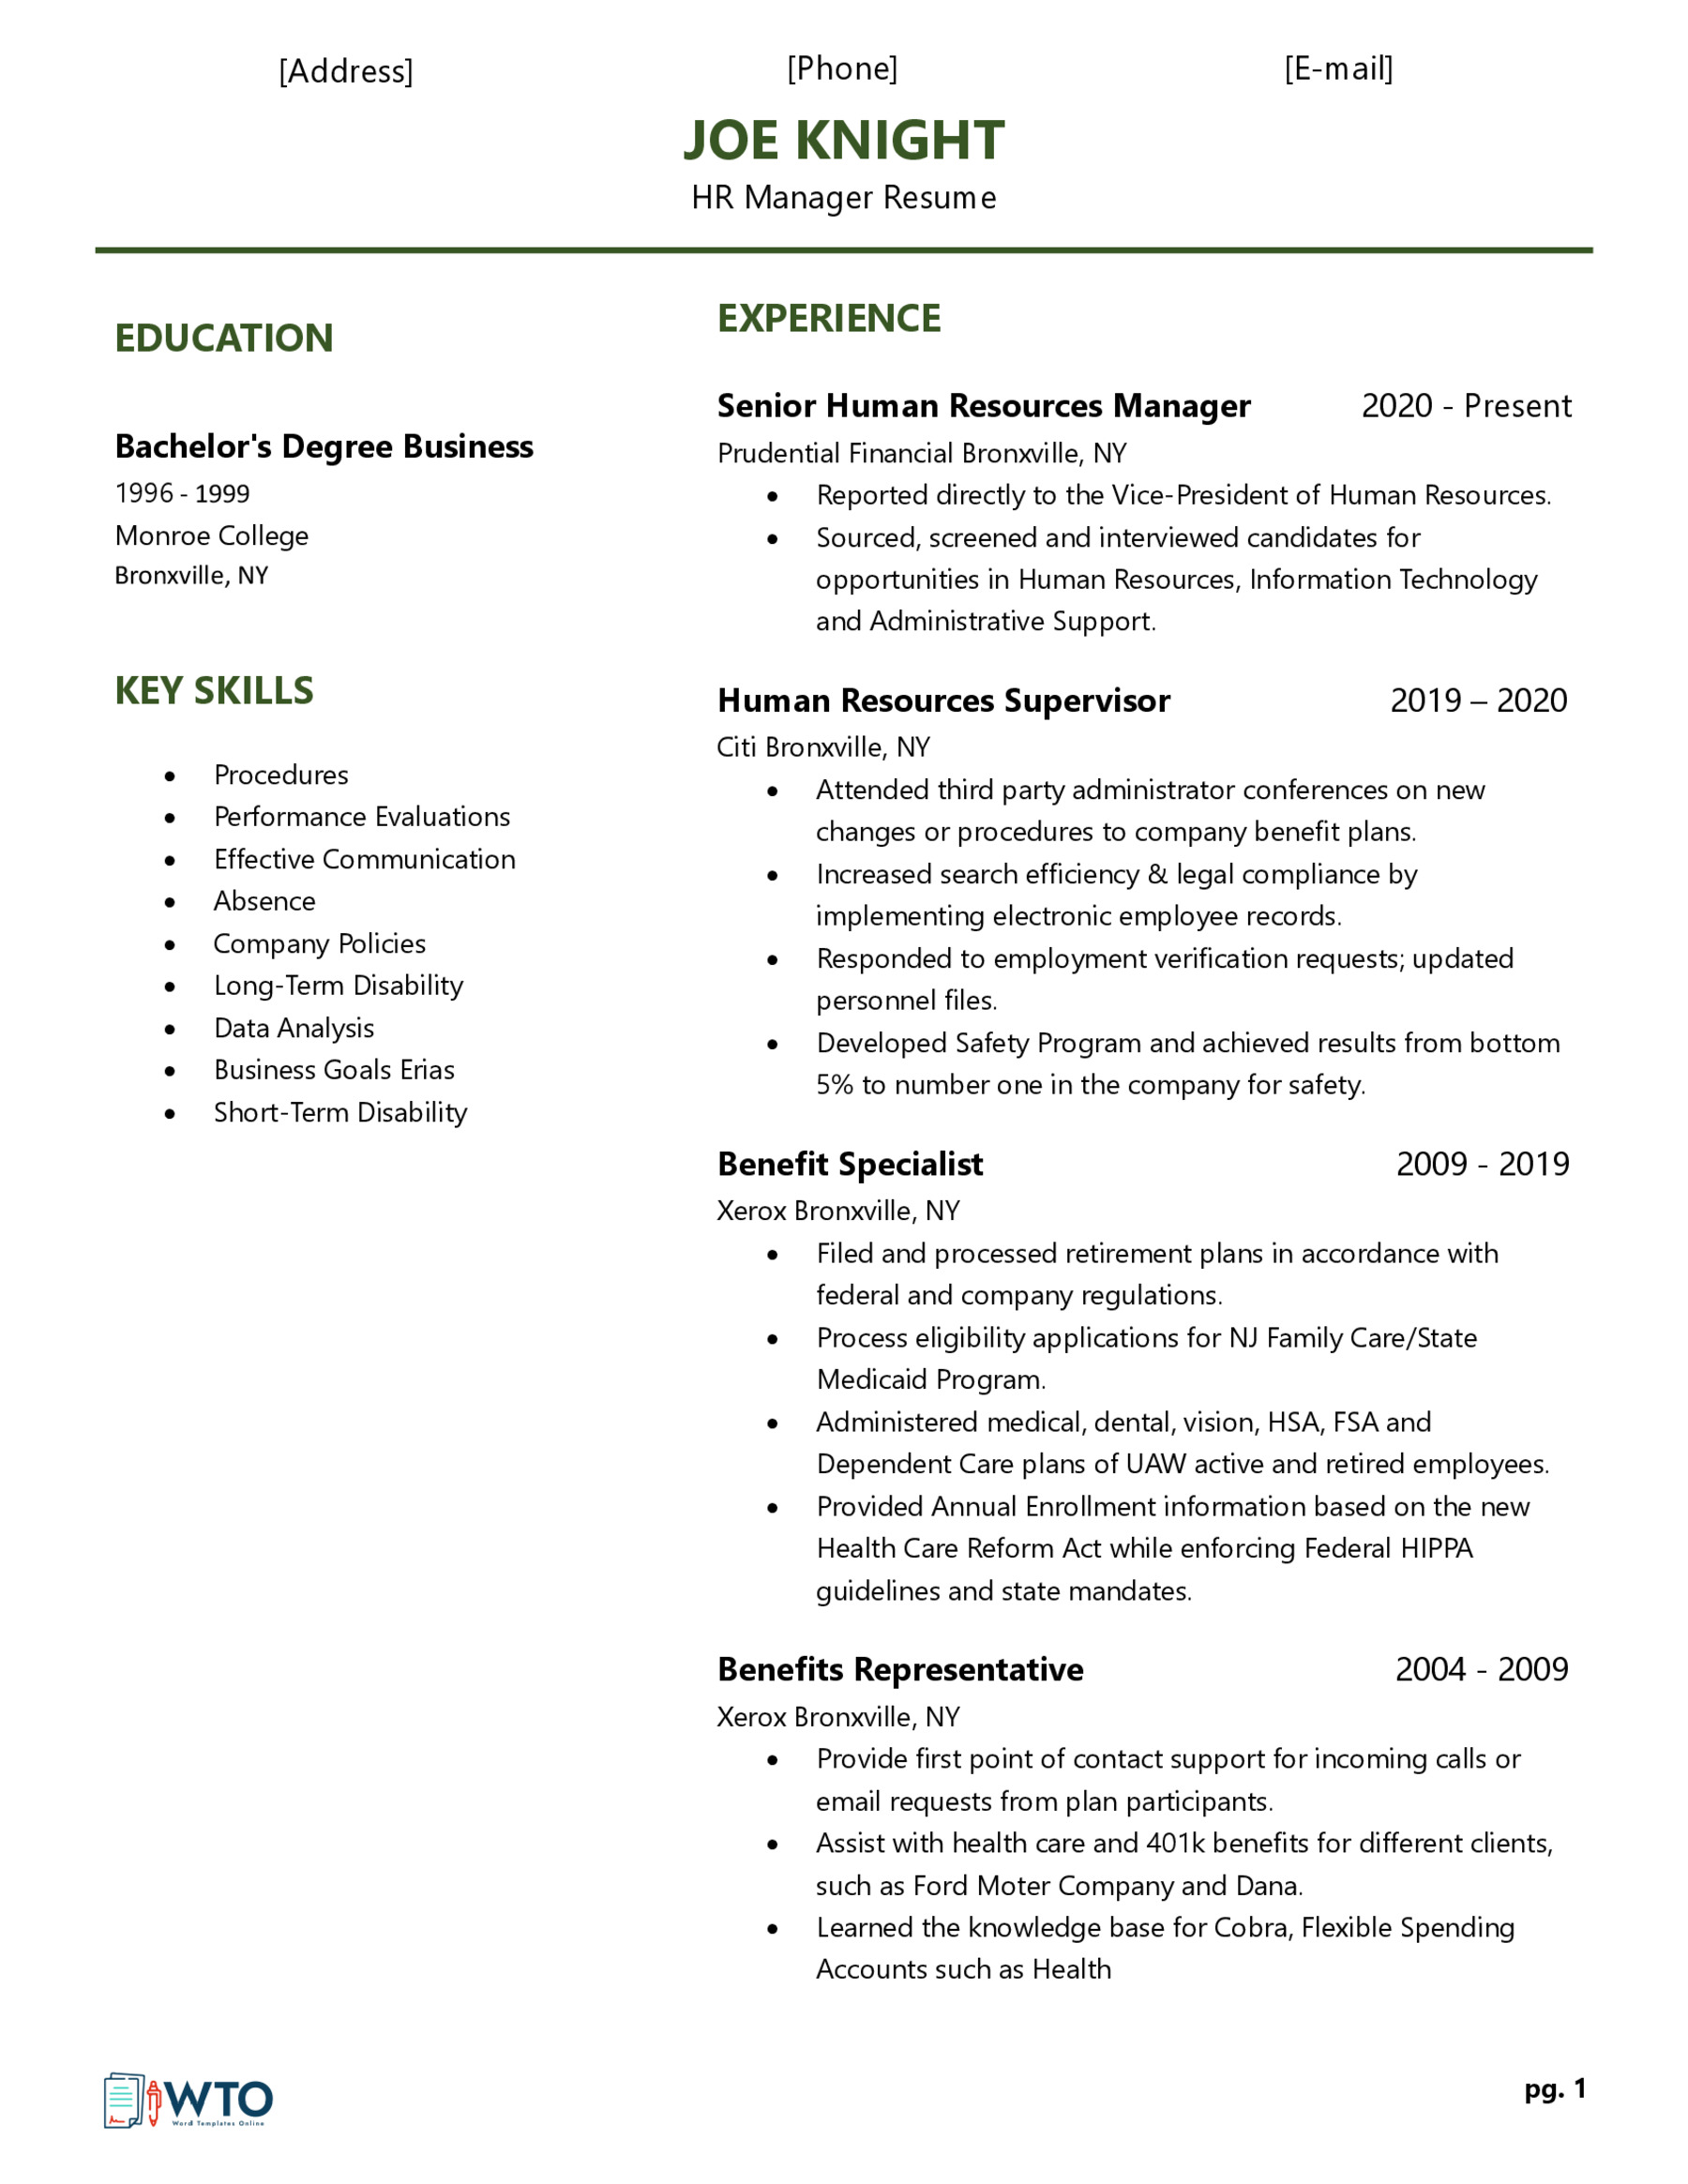 HR Manager Resume Template - Ready-to-Use Word Document